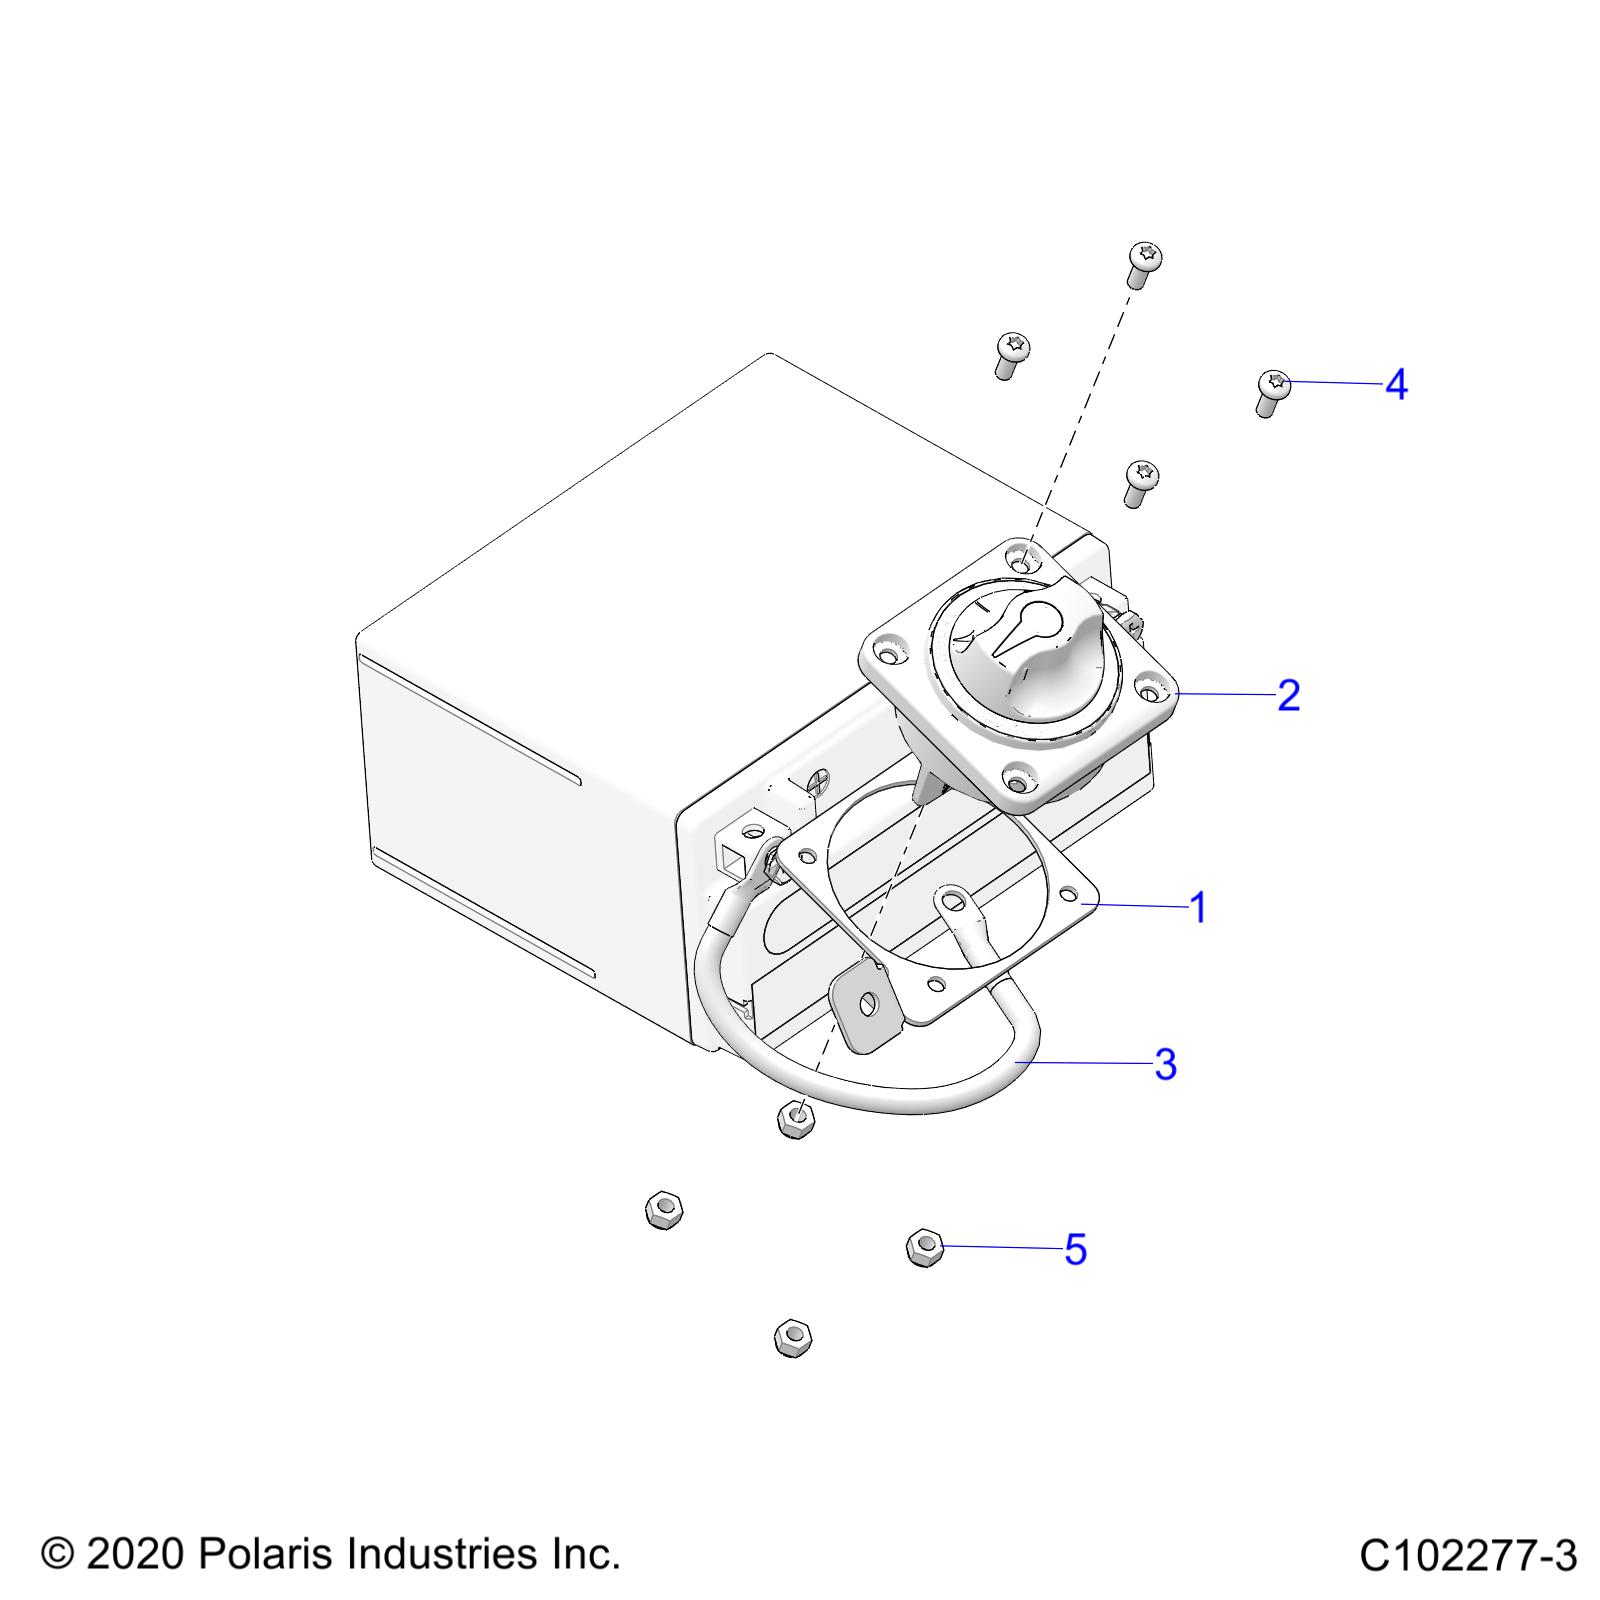 Part Number : 4015966 SWITCH-BATTERY ISOLATION 300A